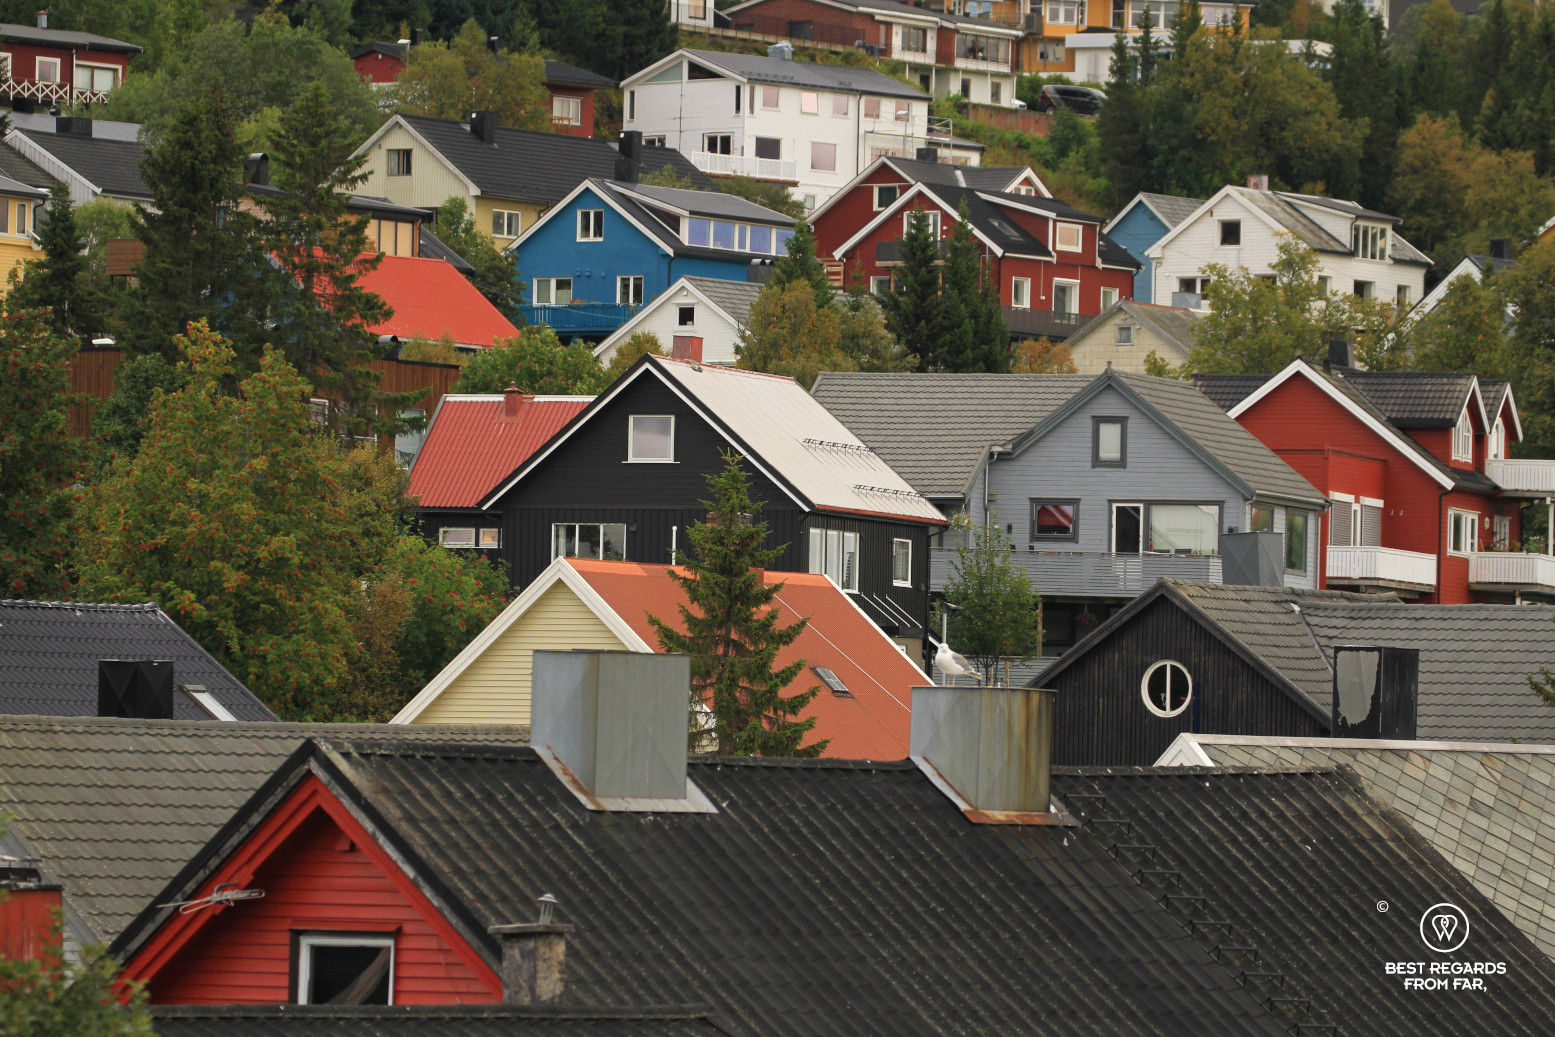 Tromso rooftops and colourful houses, Norway